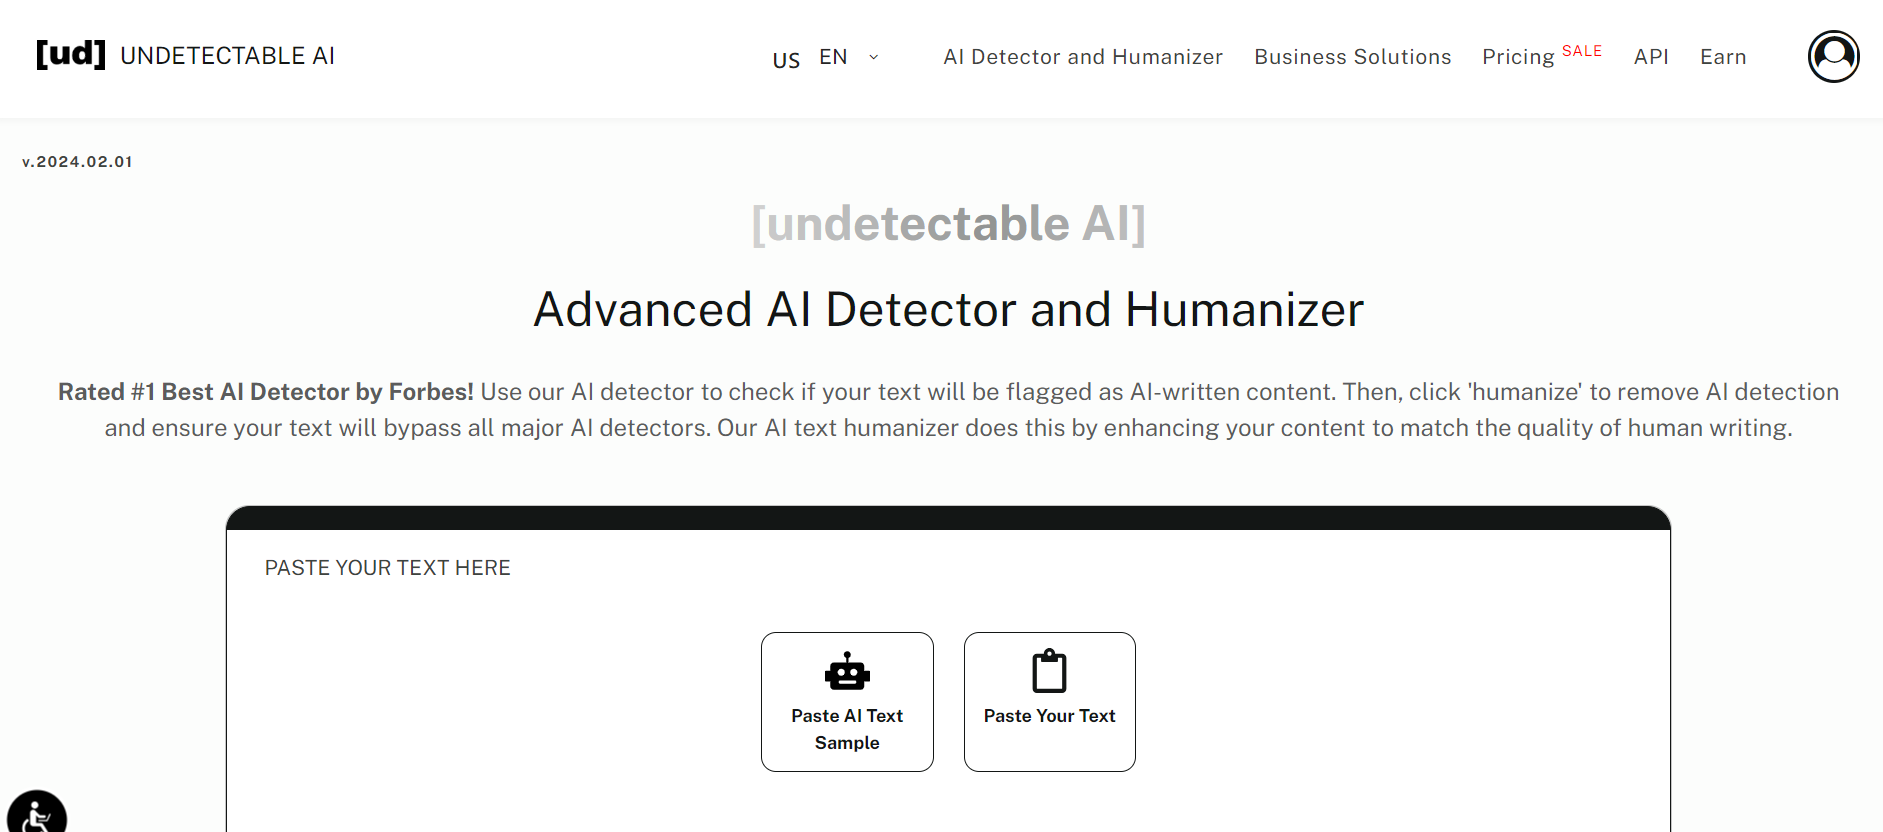 UNDETECTABLE AI